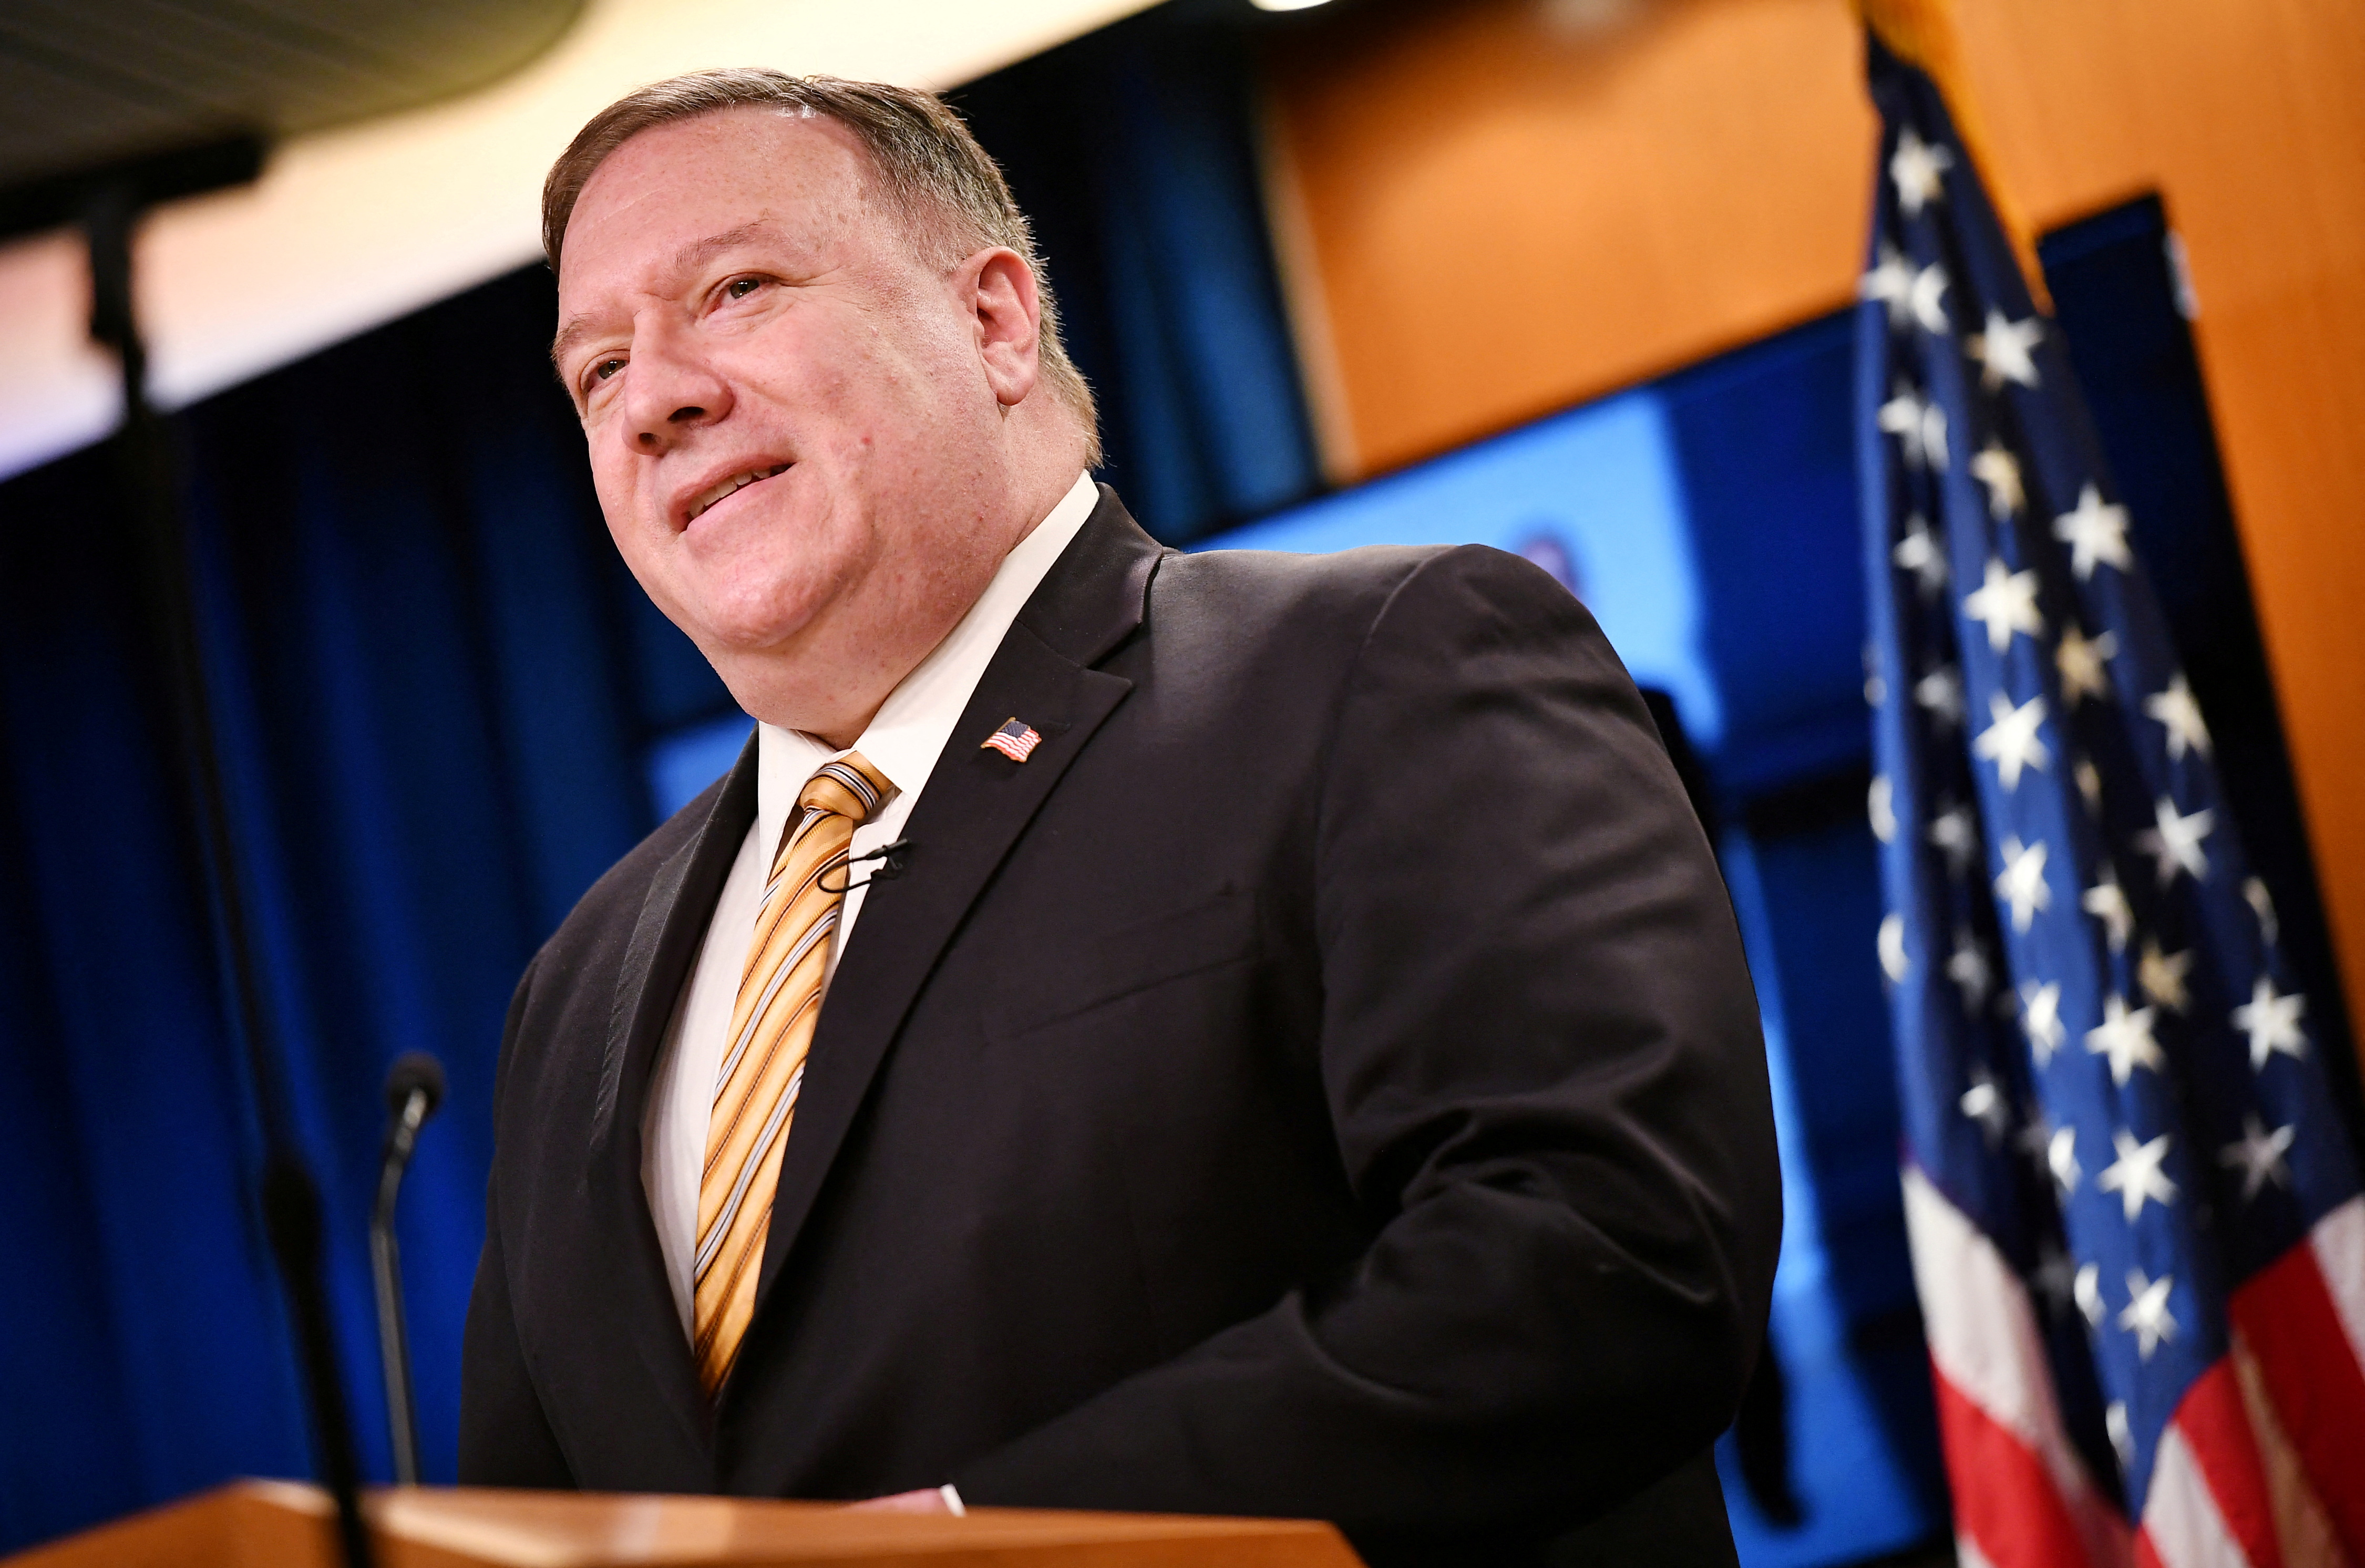 Mike Pompeo, who riled China while in office, to visit Taiwan